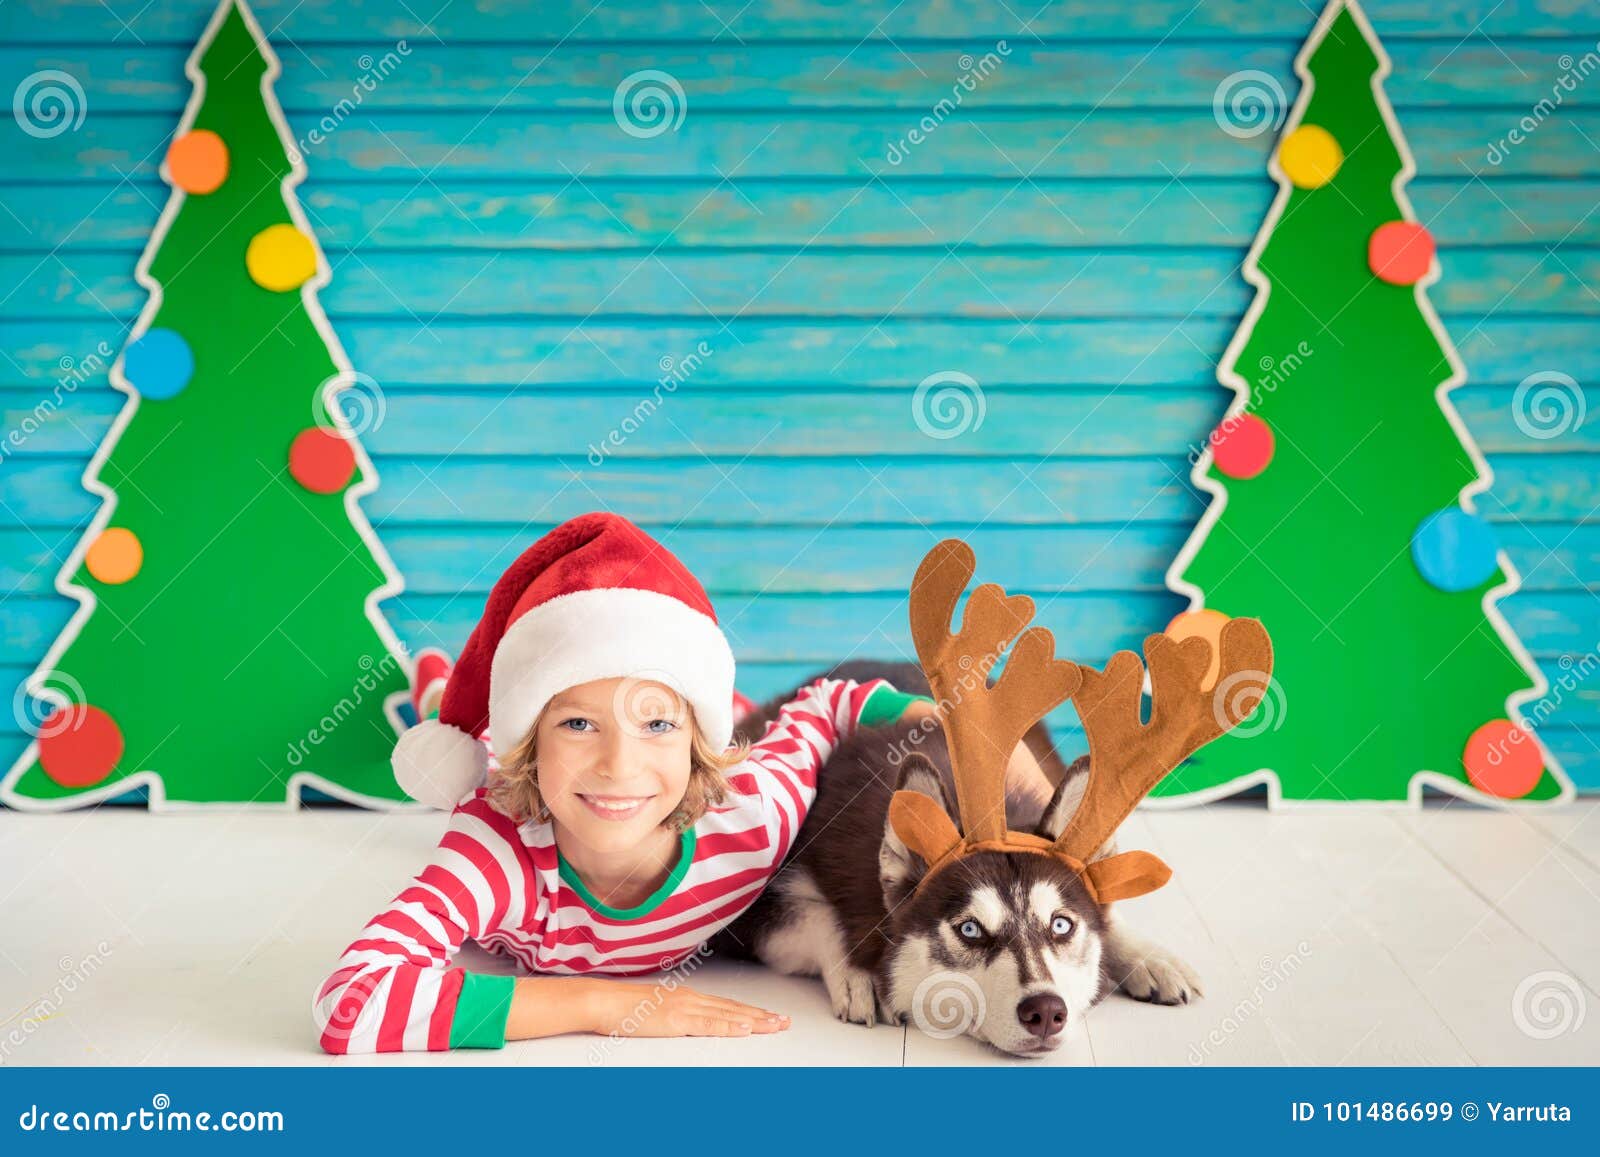 Happy child and dog on Christmas eve Kid and pet dressed in Santa Claus hat Girl having fun with husky at home Chinese calendar new year concept